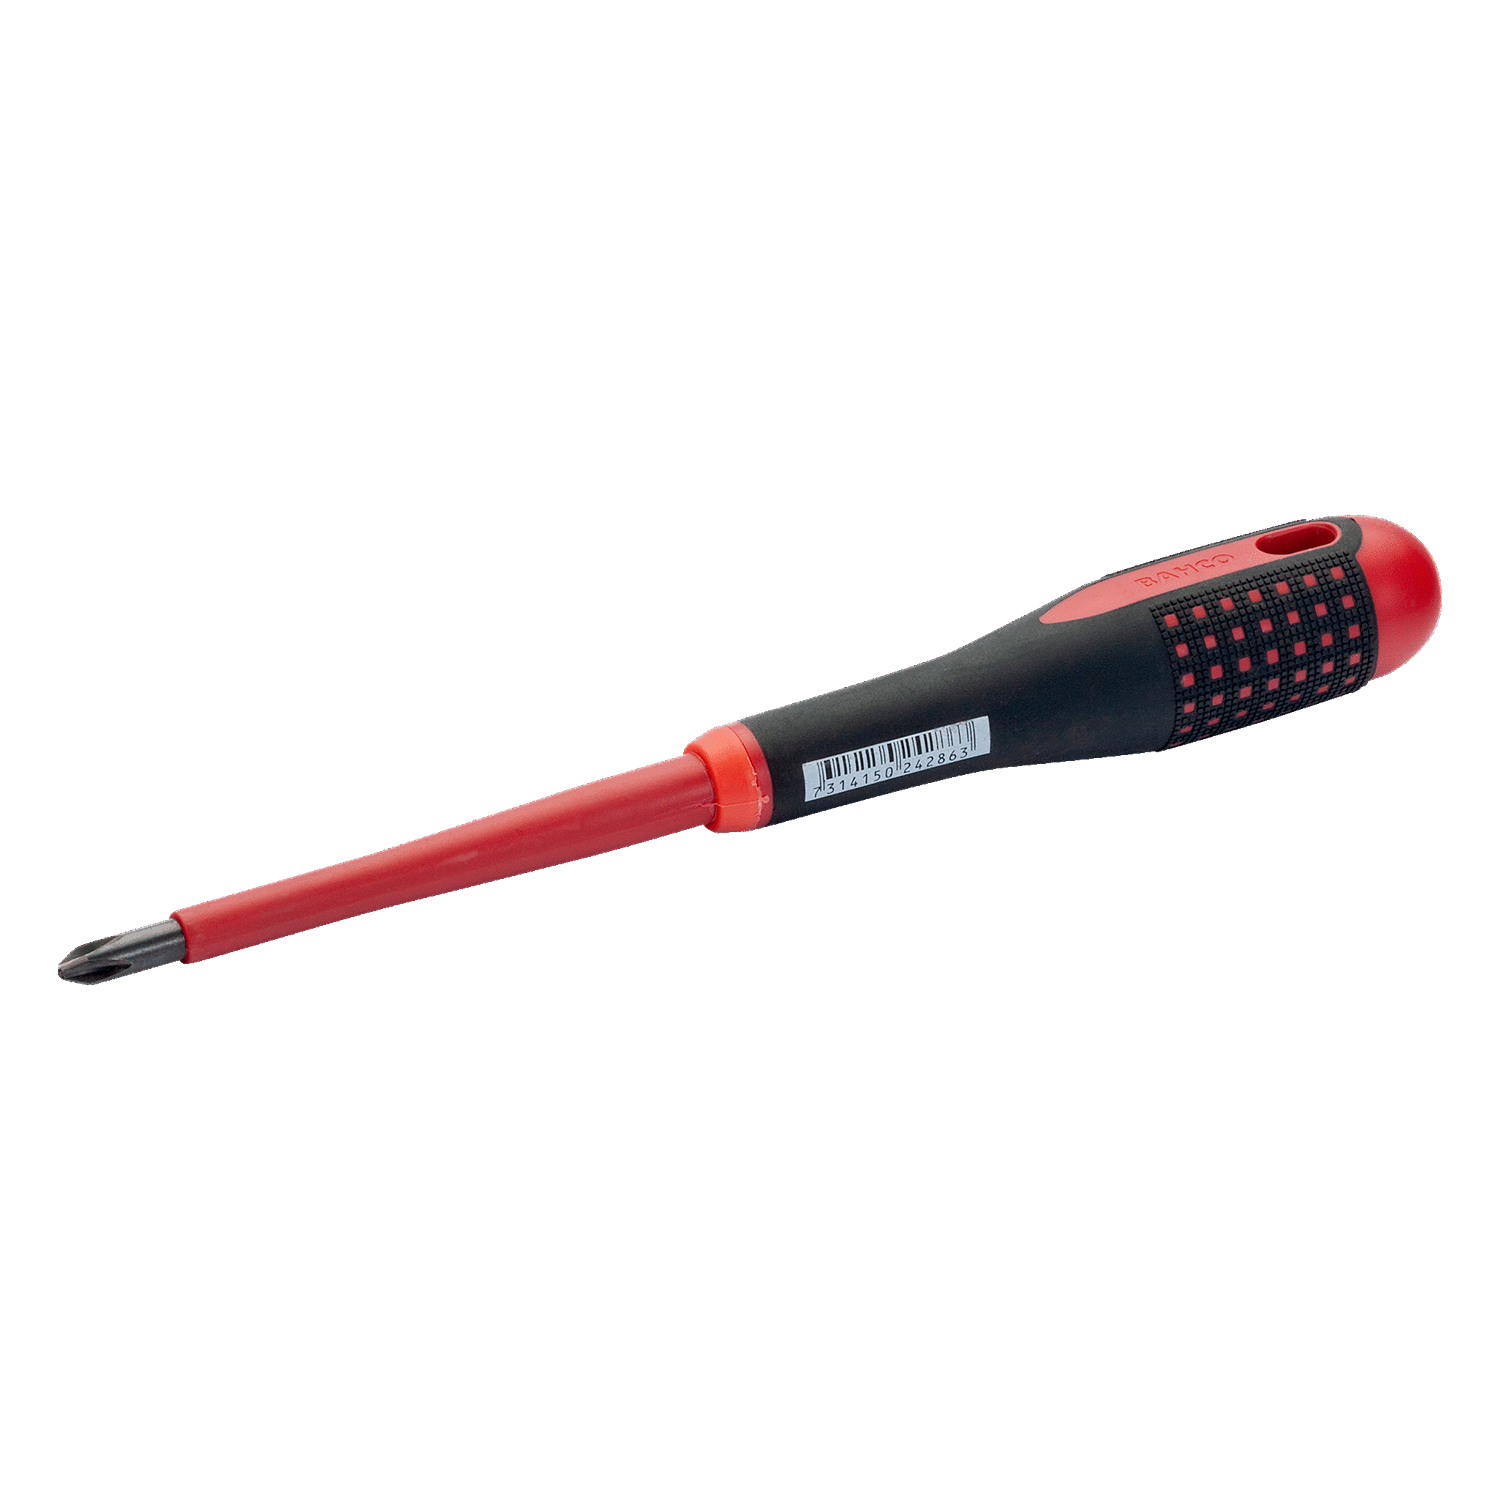 BAHCO BE-8600S - BE-8640S ERGO VDE Insulated Phillips Screwdriver - Premium Phillips Screwdriver from BAHCO - Shop now at Yew Aik.